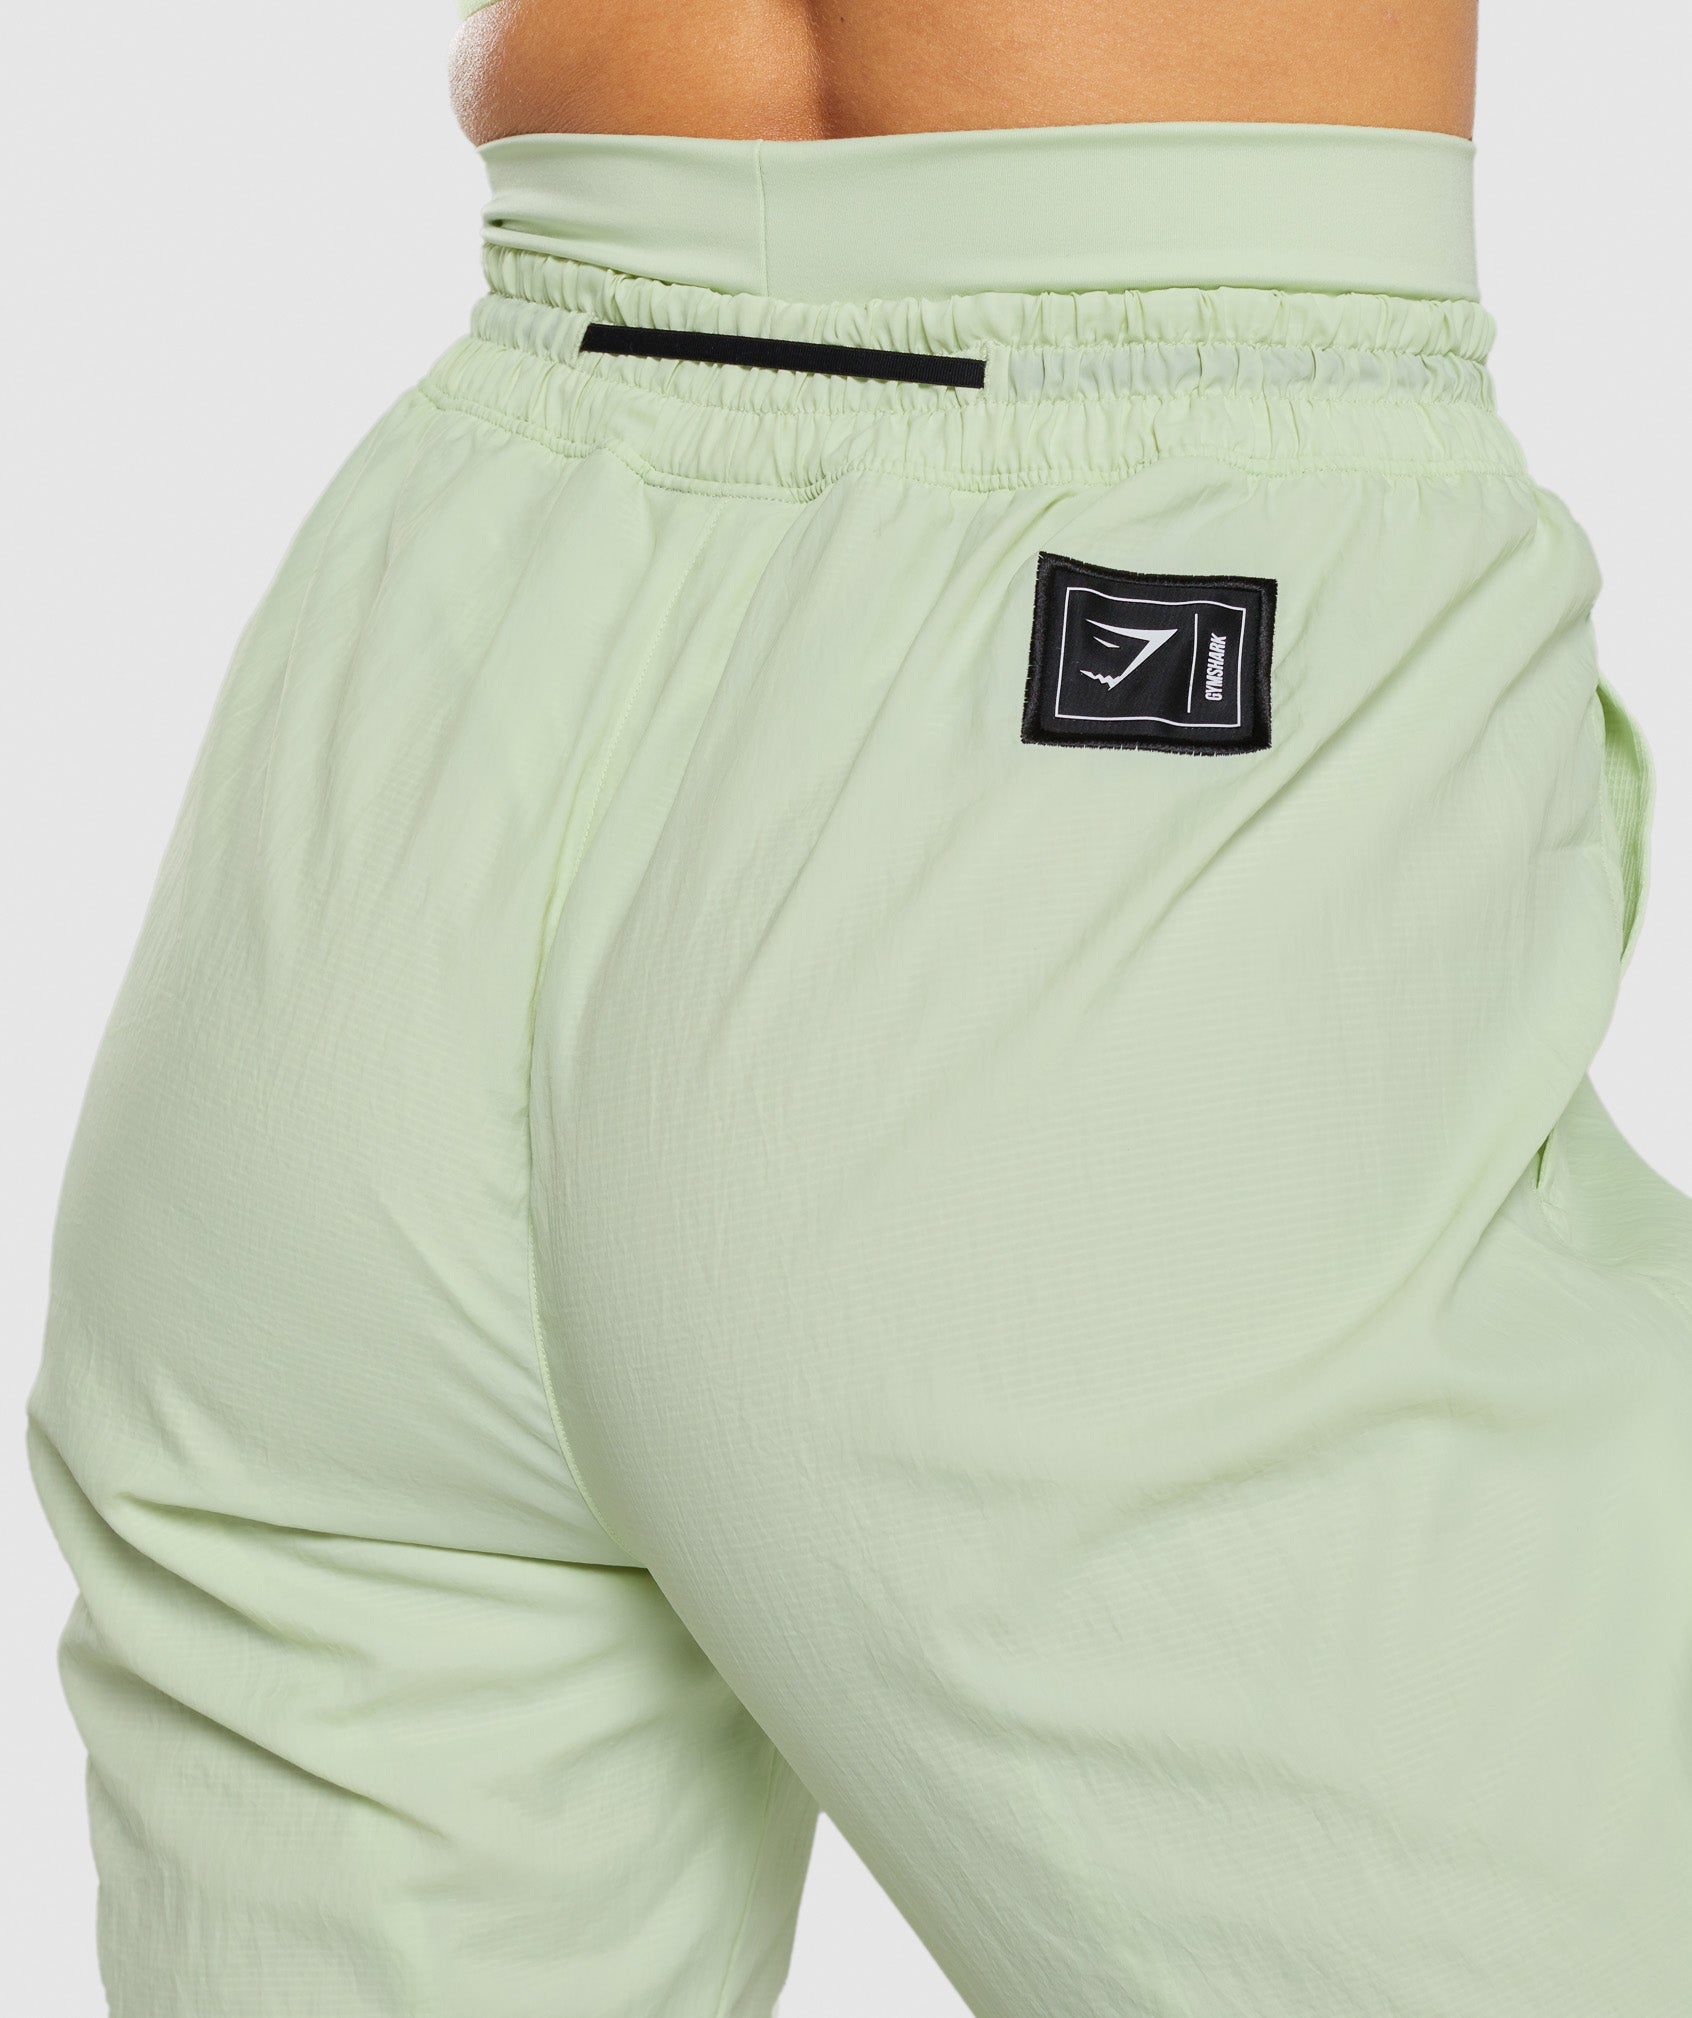 CTY Joggers in Light Green - view 5